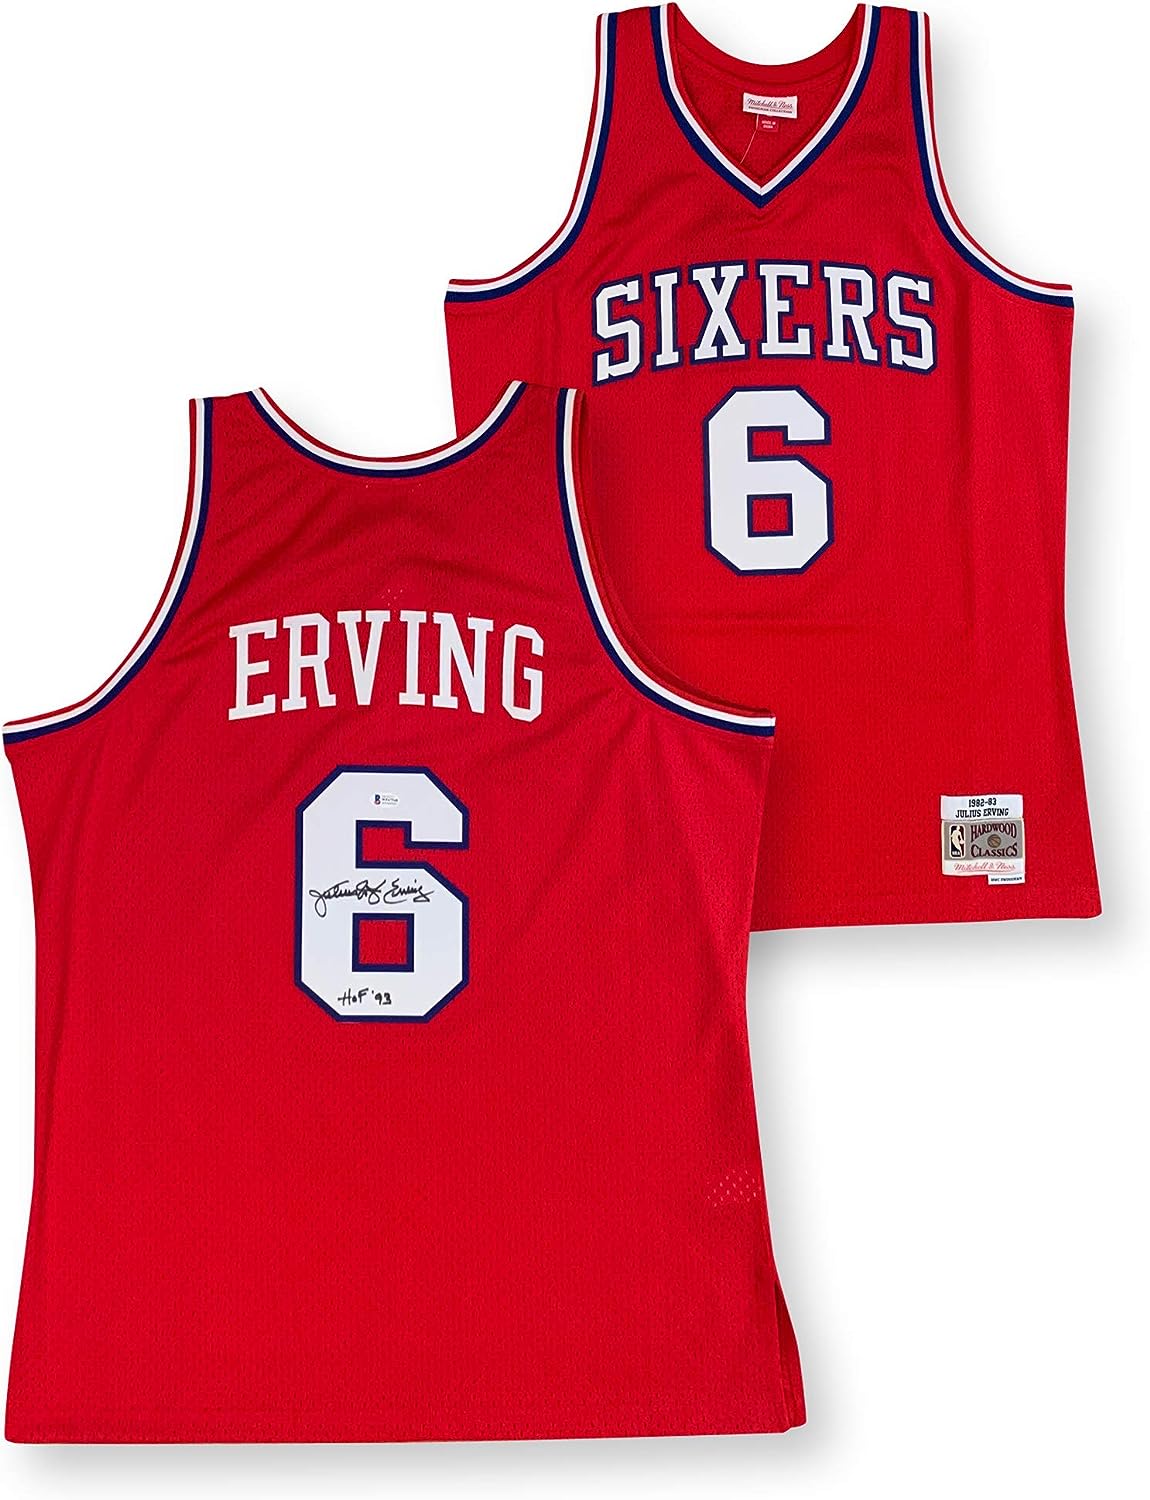 From Sewn to Slam Dunk: The Evolution of NBA Basketball Jersey Manufacturers